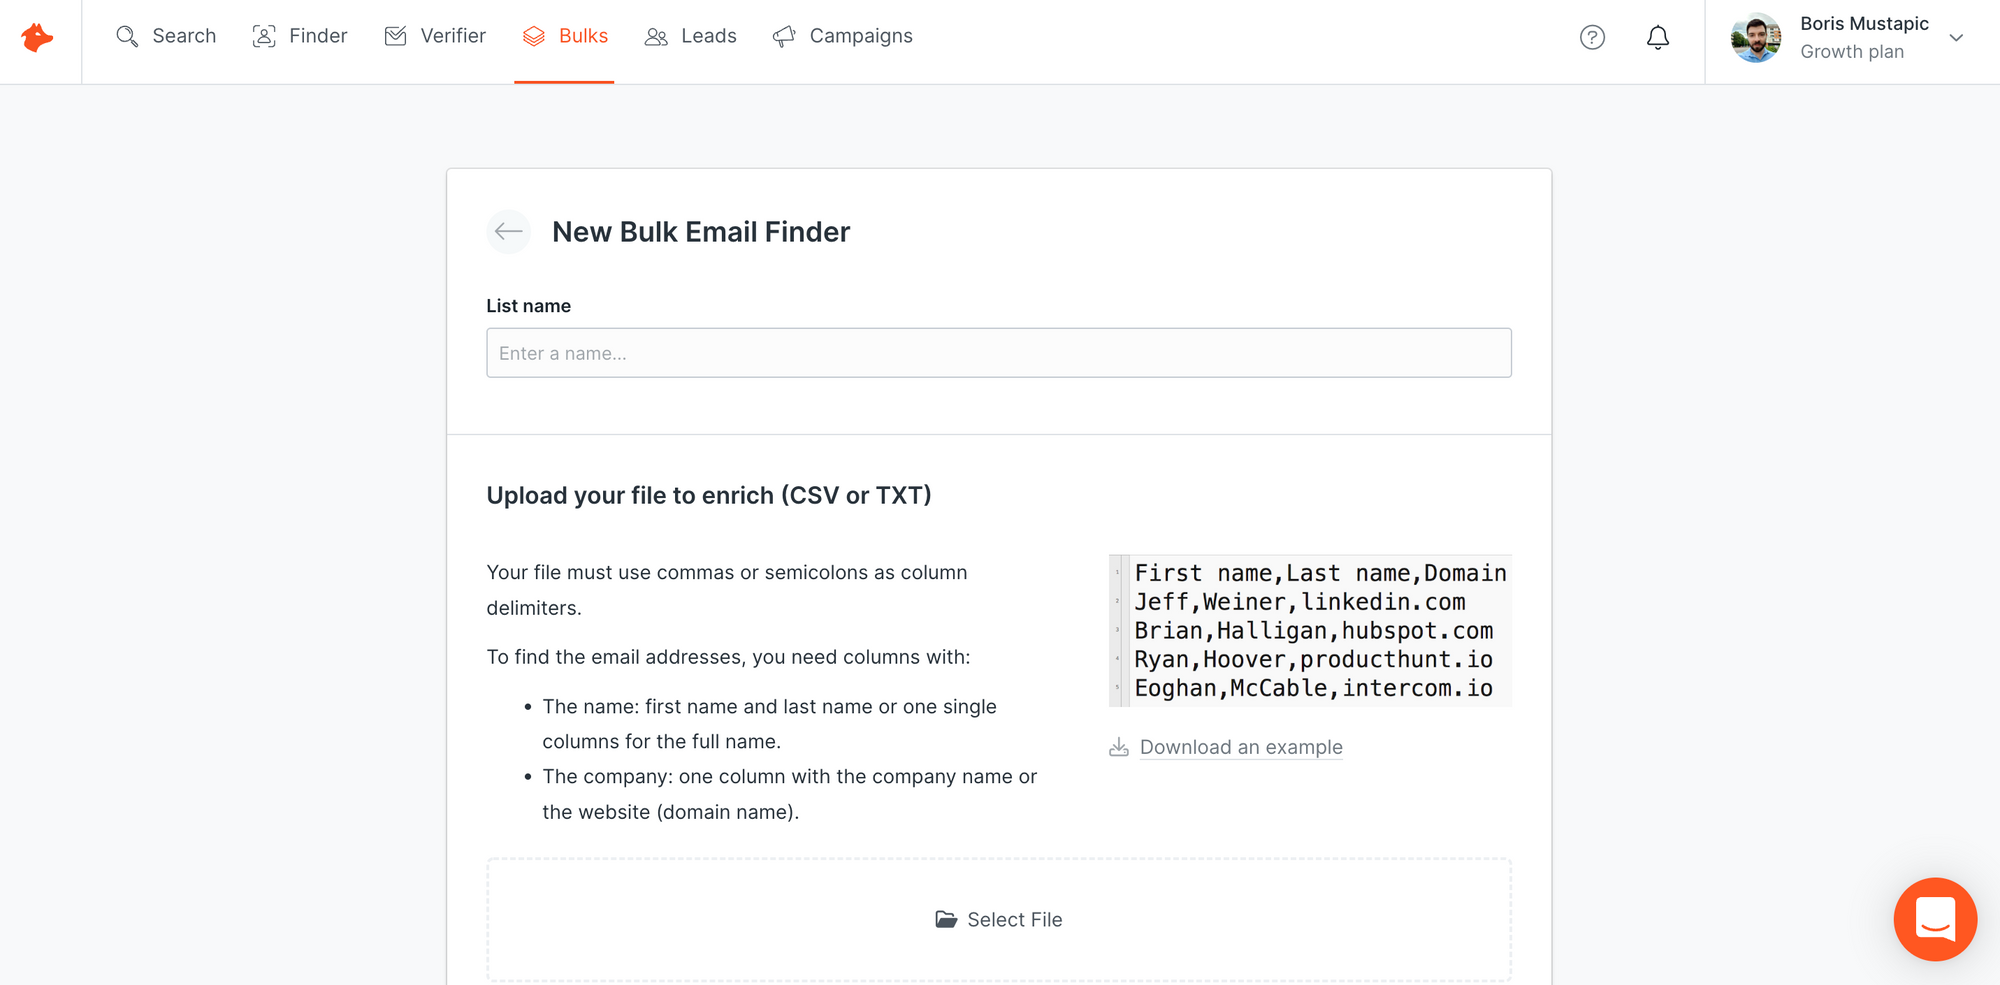 New Bulk Email Finder search